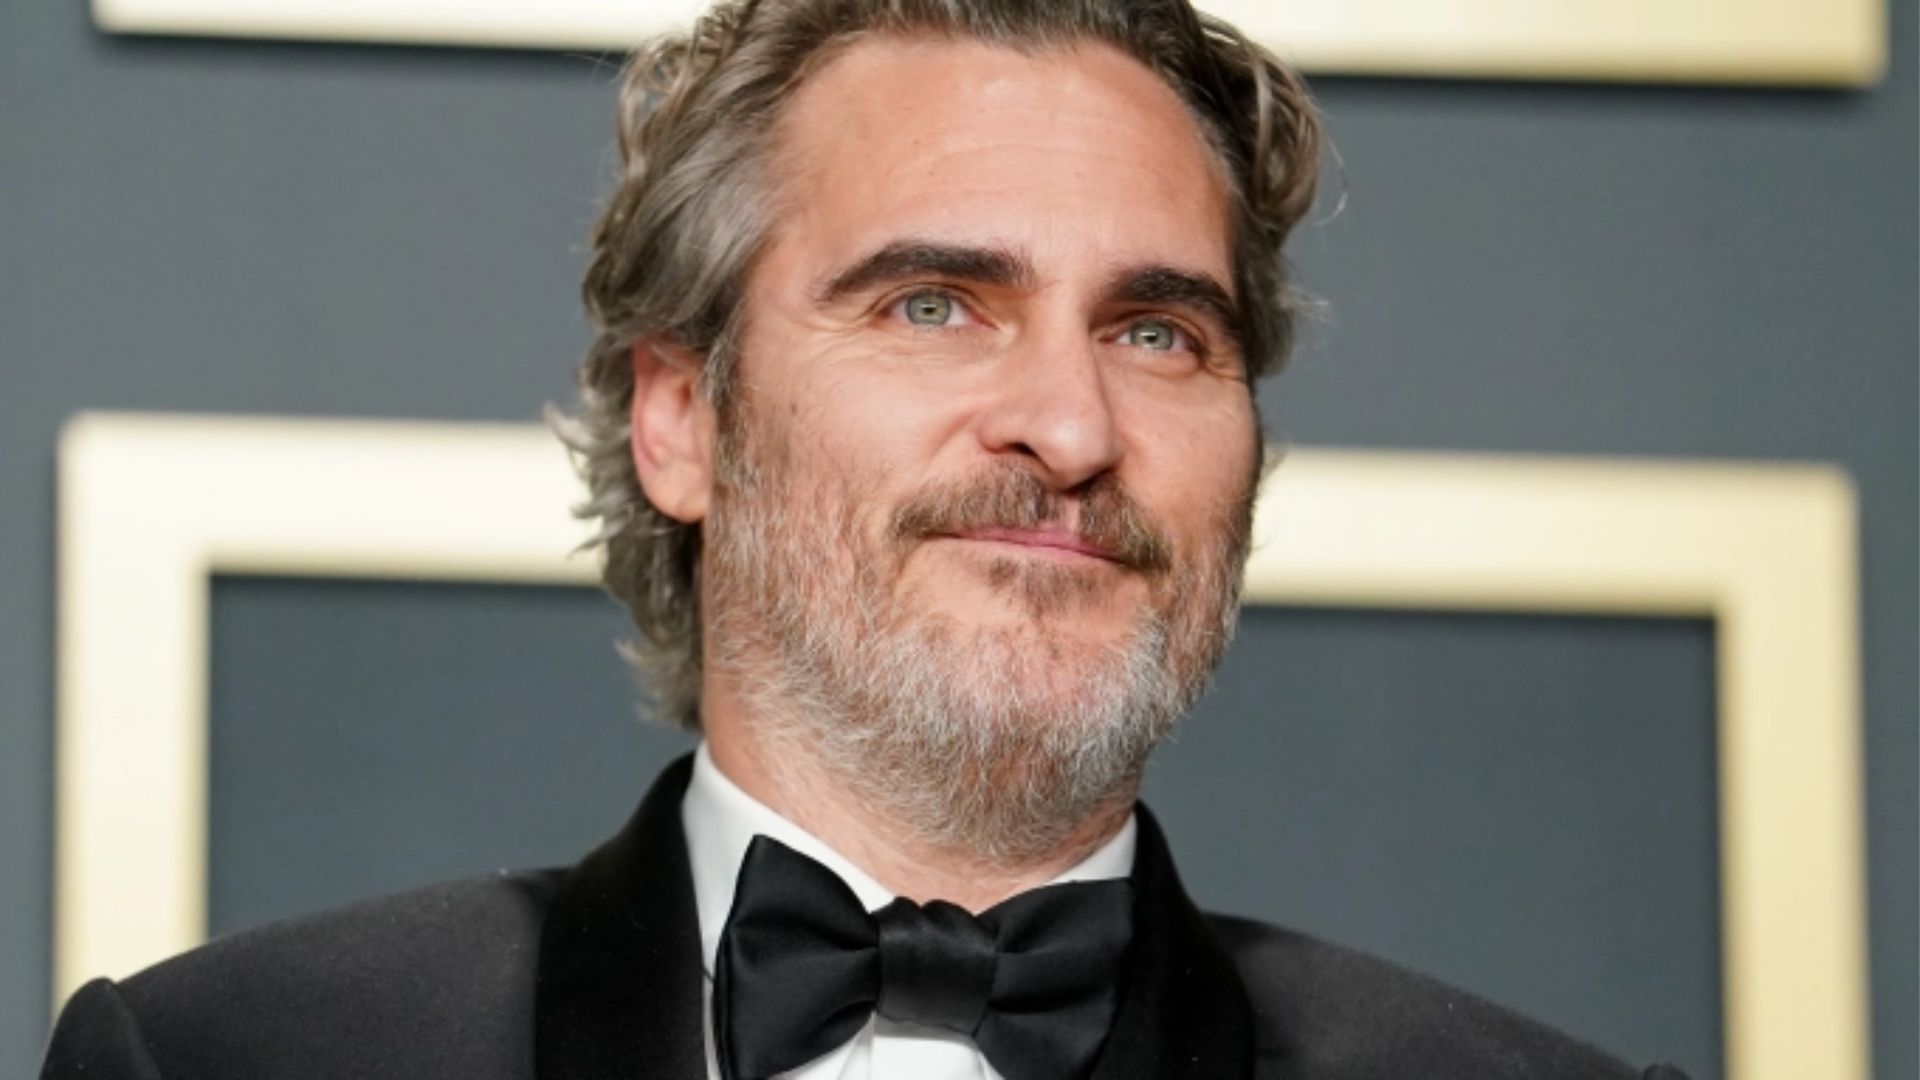 Joaquin Phoenix - Known For Playing Dark And Unconventional Roles In Independent Films